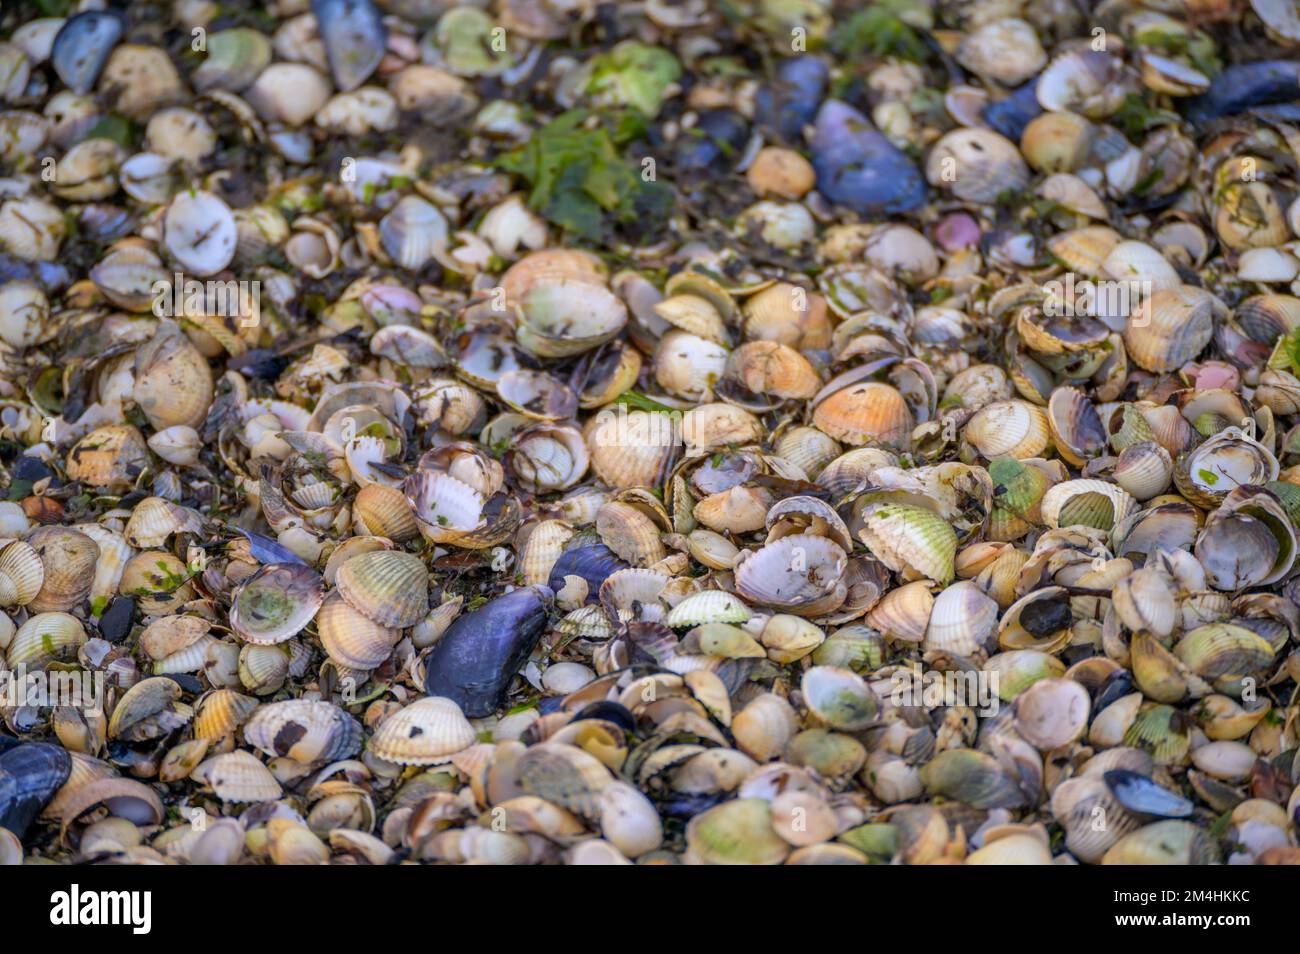 Shallow focus shot of variety of wadden sea seashells washed up on the shore Stock Photo